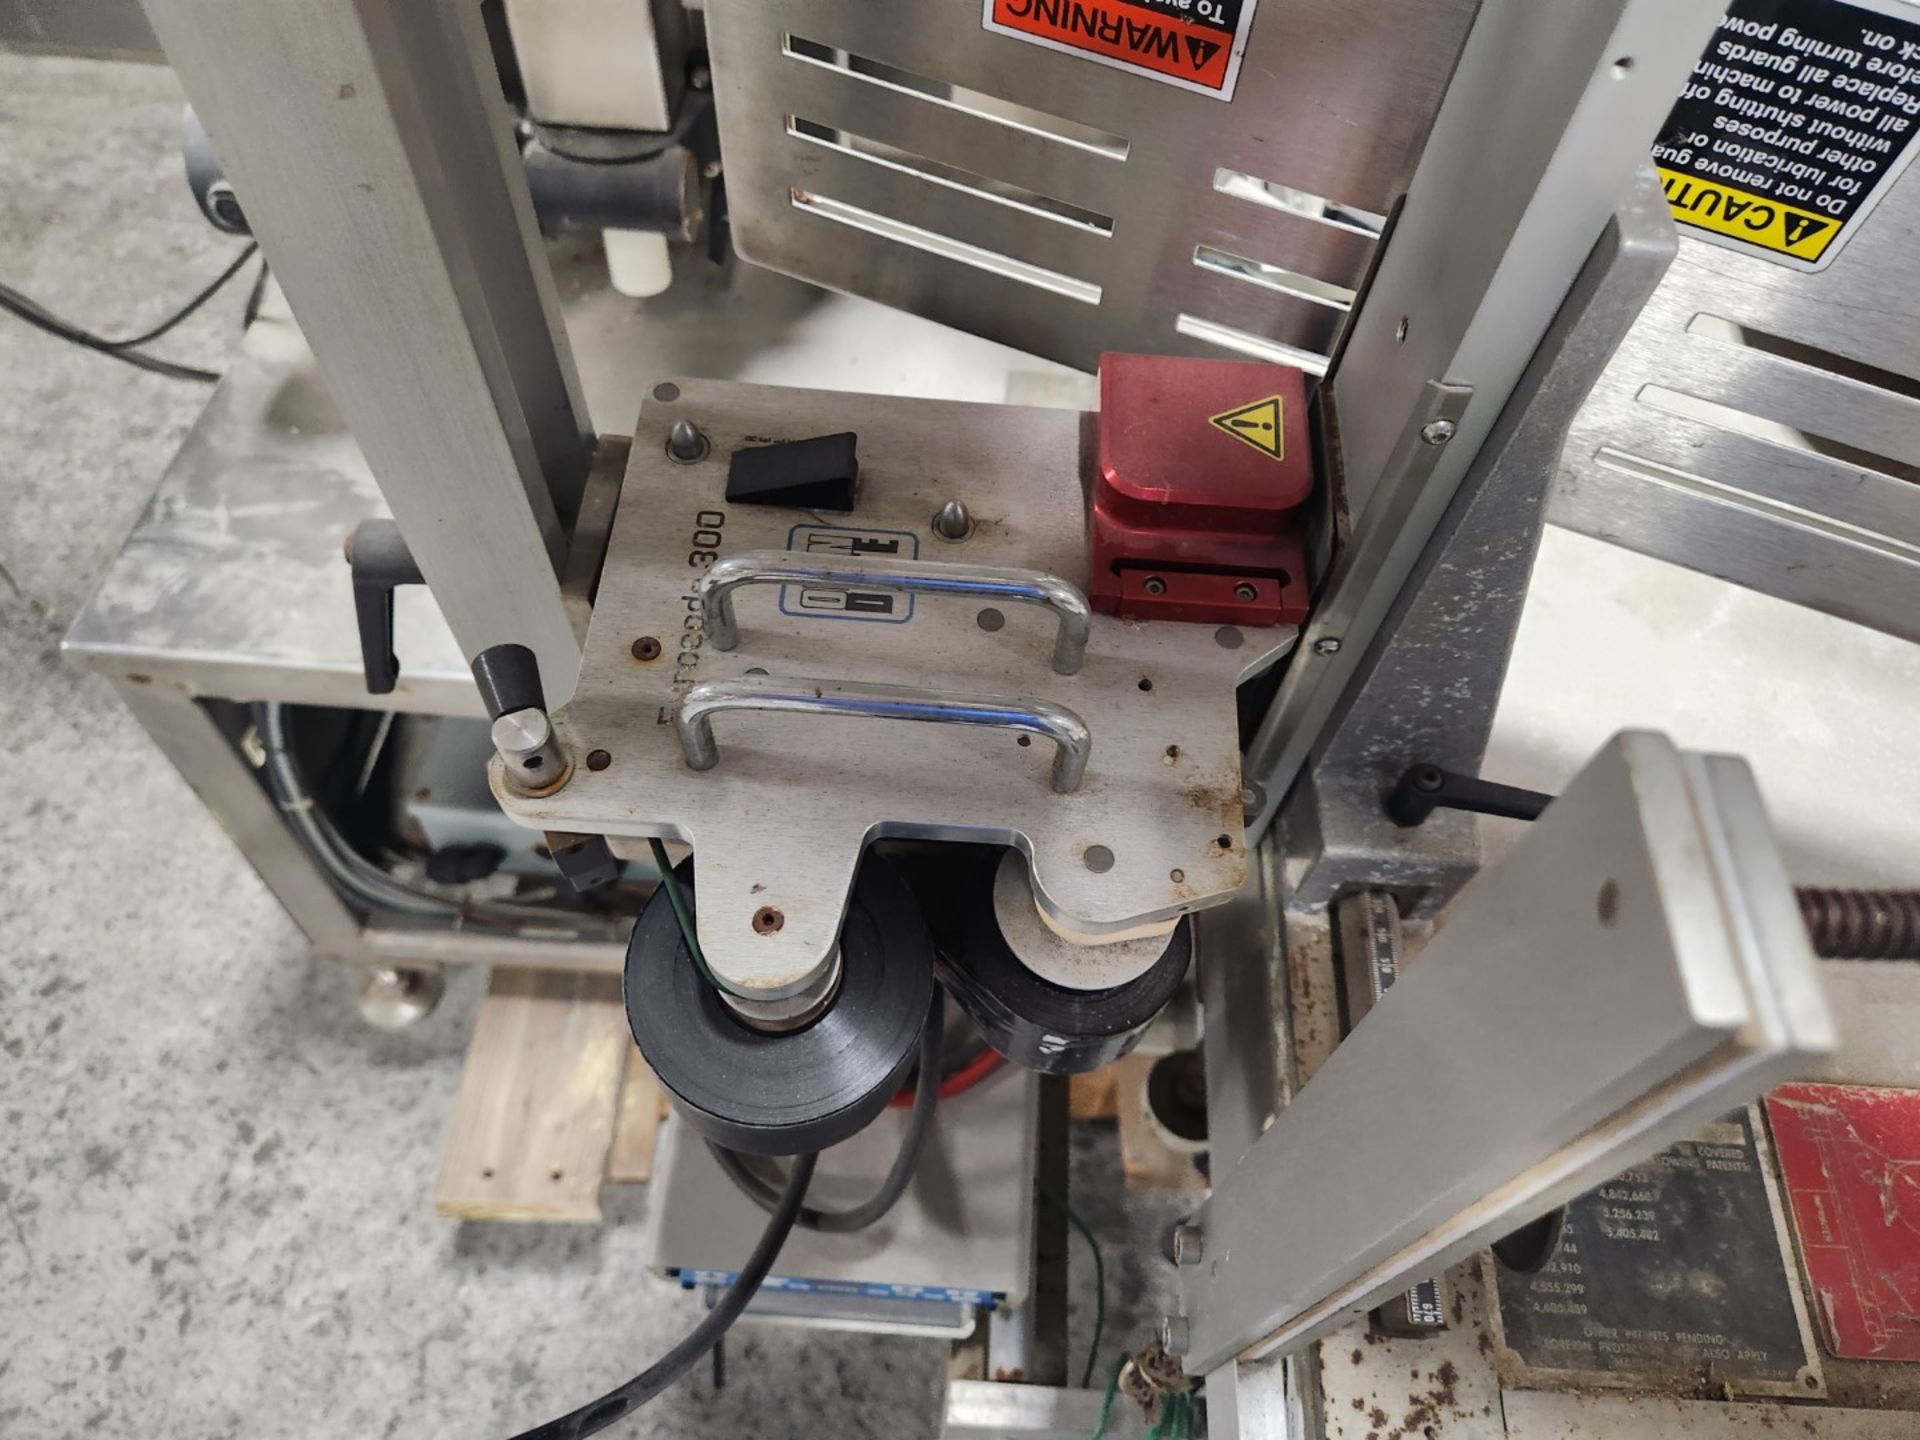 NJM-CLI wrap-around labeler, model 326VLRDBP, stainless steel construction, with label printer, - Image 7 of 16